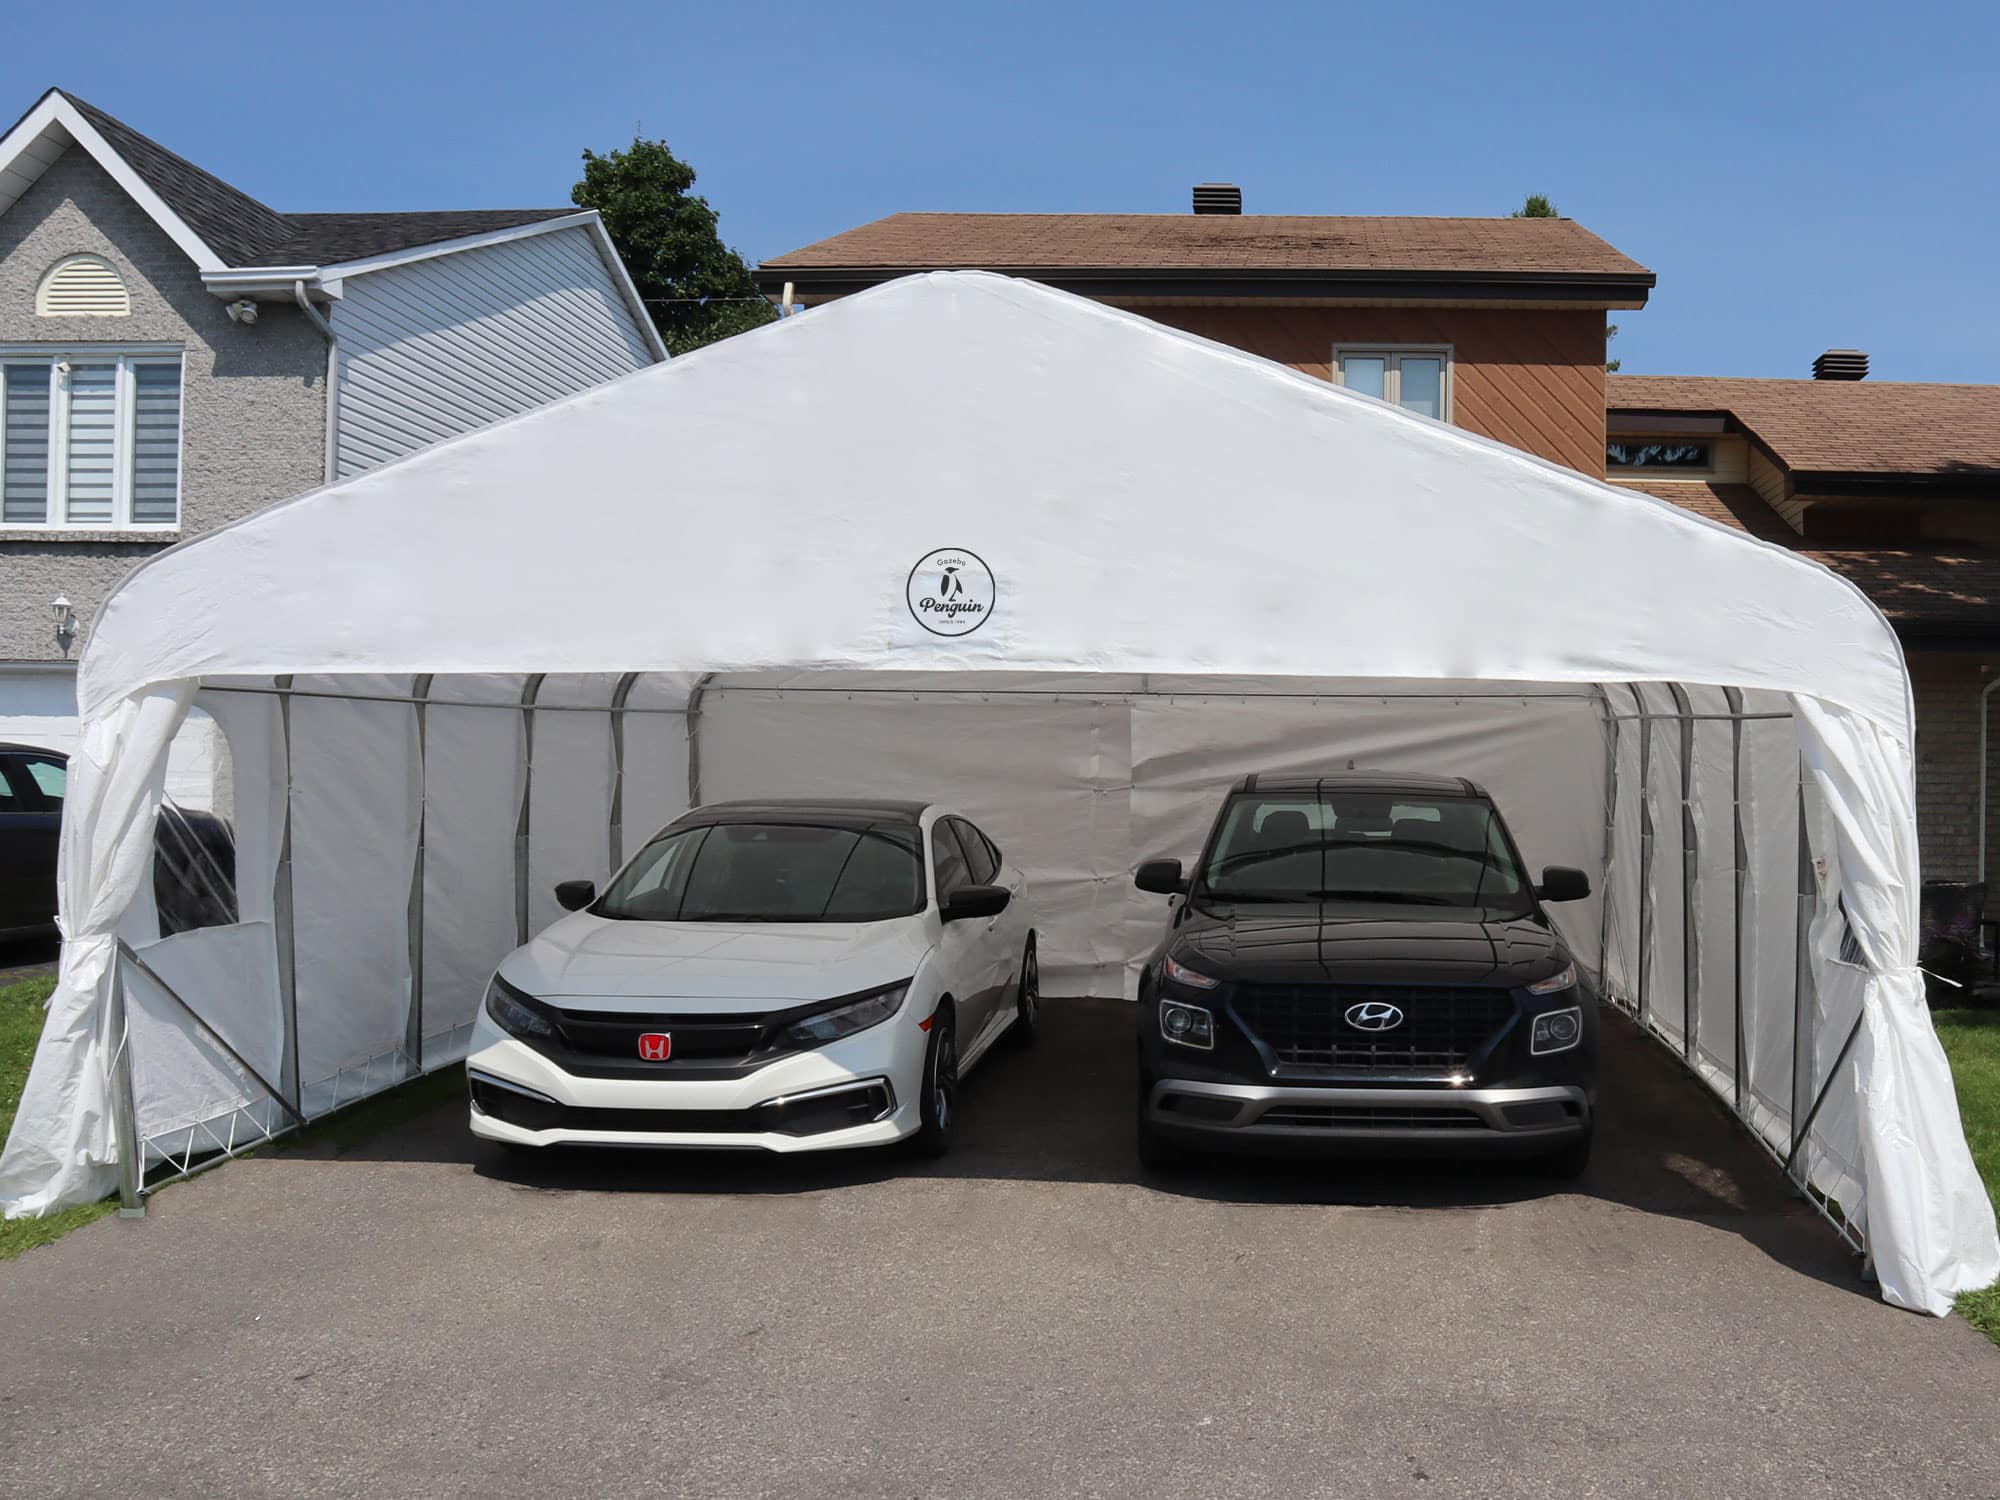 Deluxe Double Car Shelter 20′ x 20′